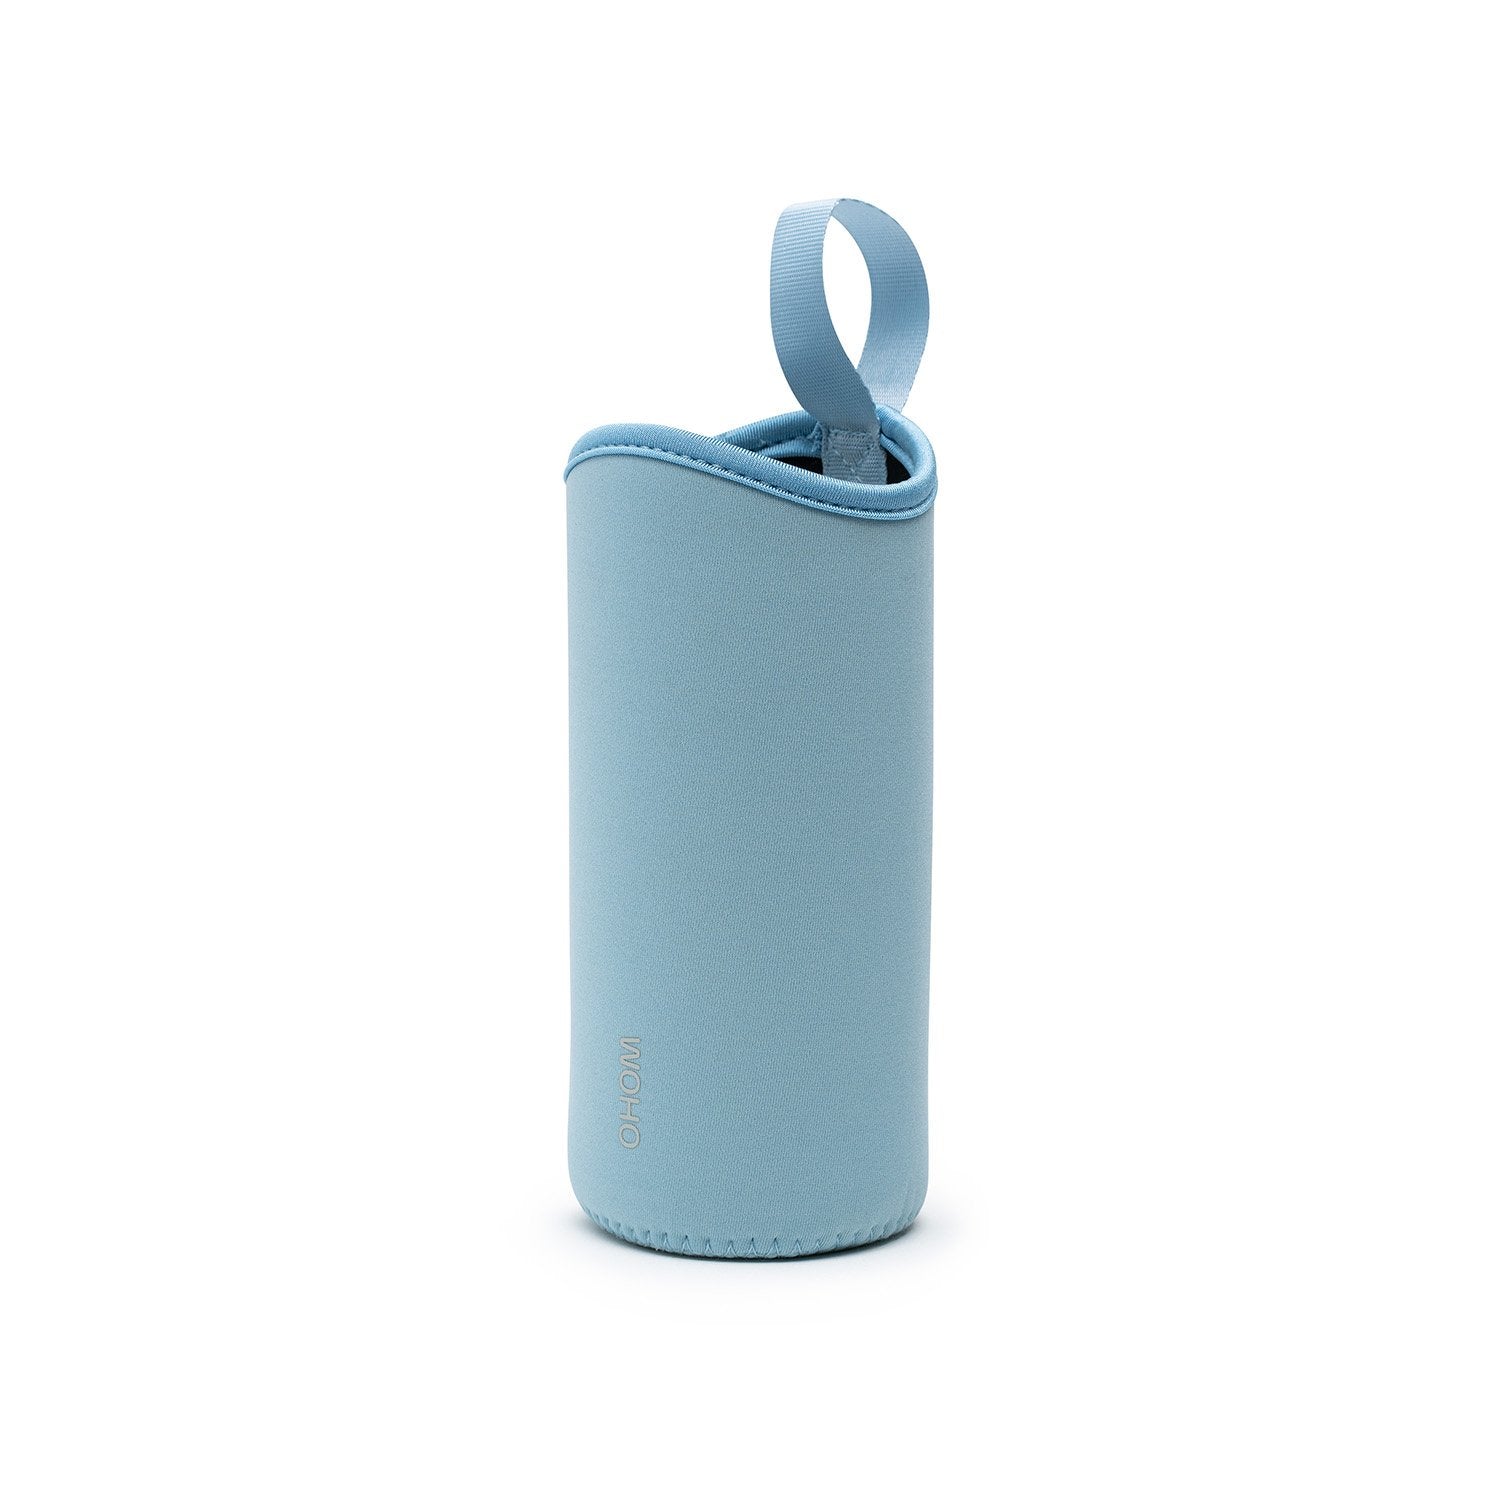 Light blue pouch for bottle with OHOM logo